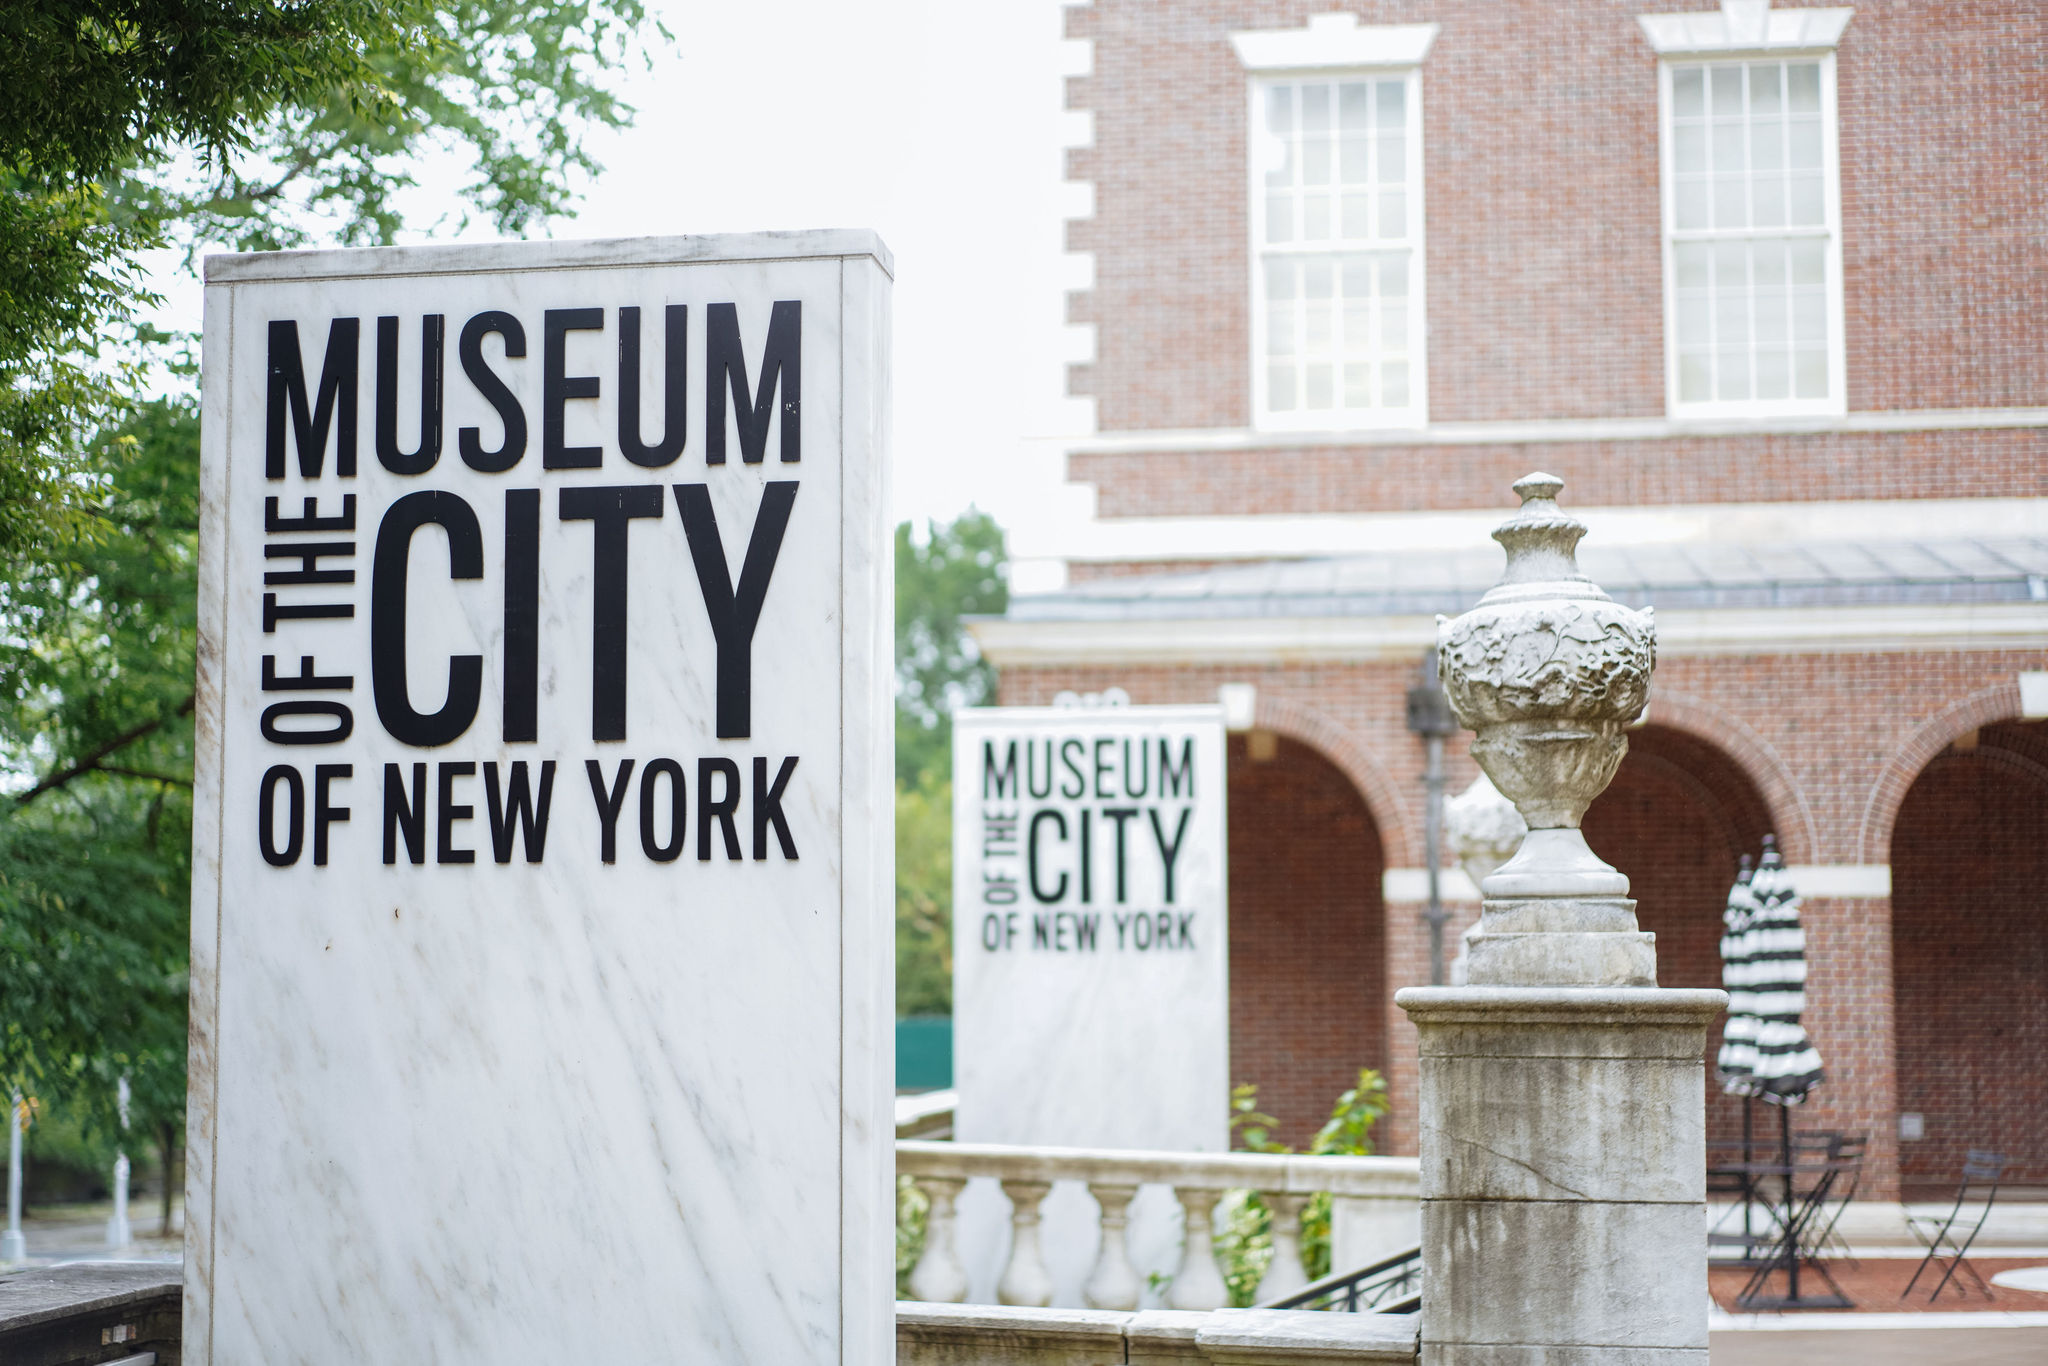 View of the front of the Museum taken from the terrace facing the north corner. In the foreground is a marble sign with the logo for the Museum of the City of New York